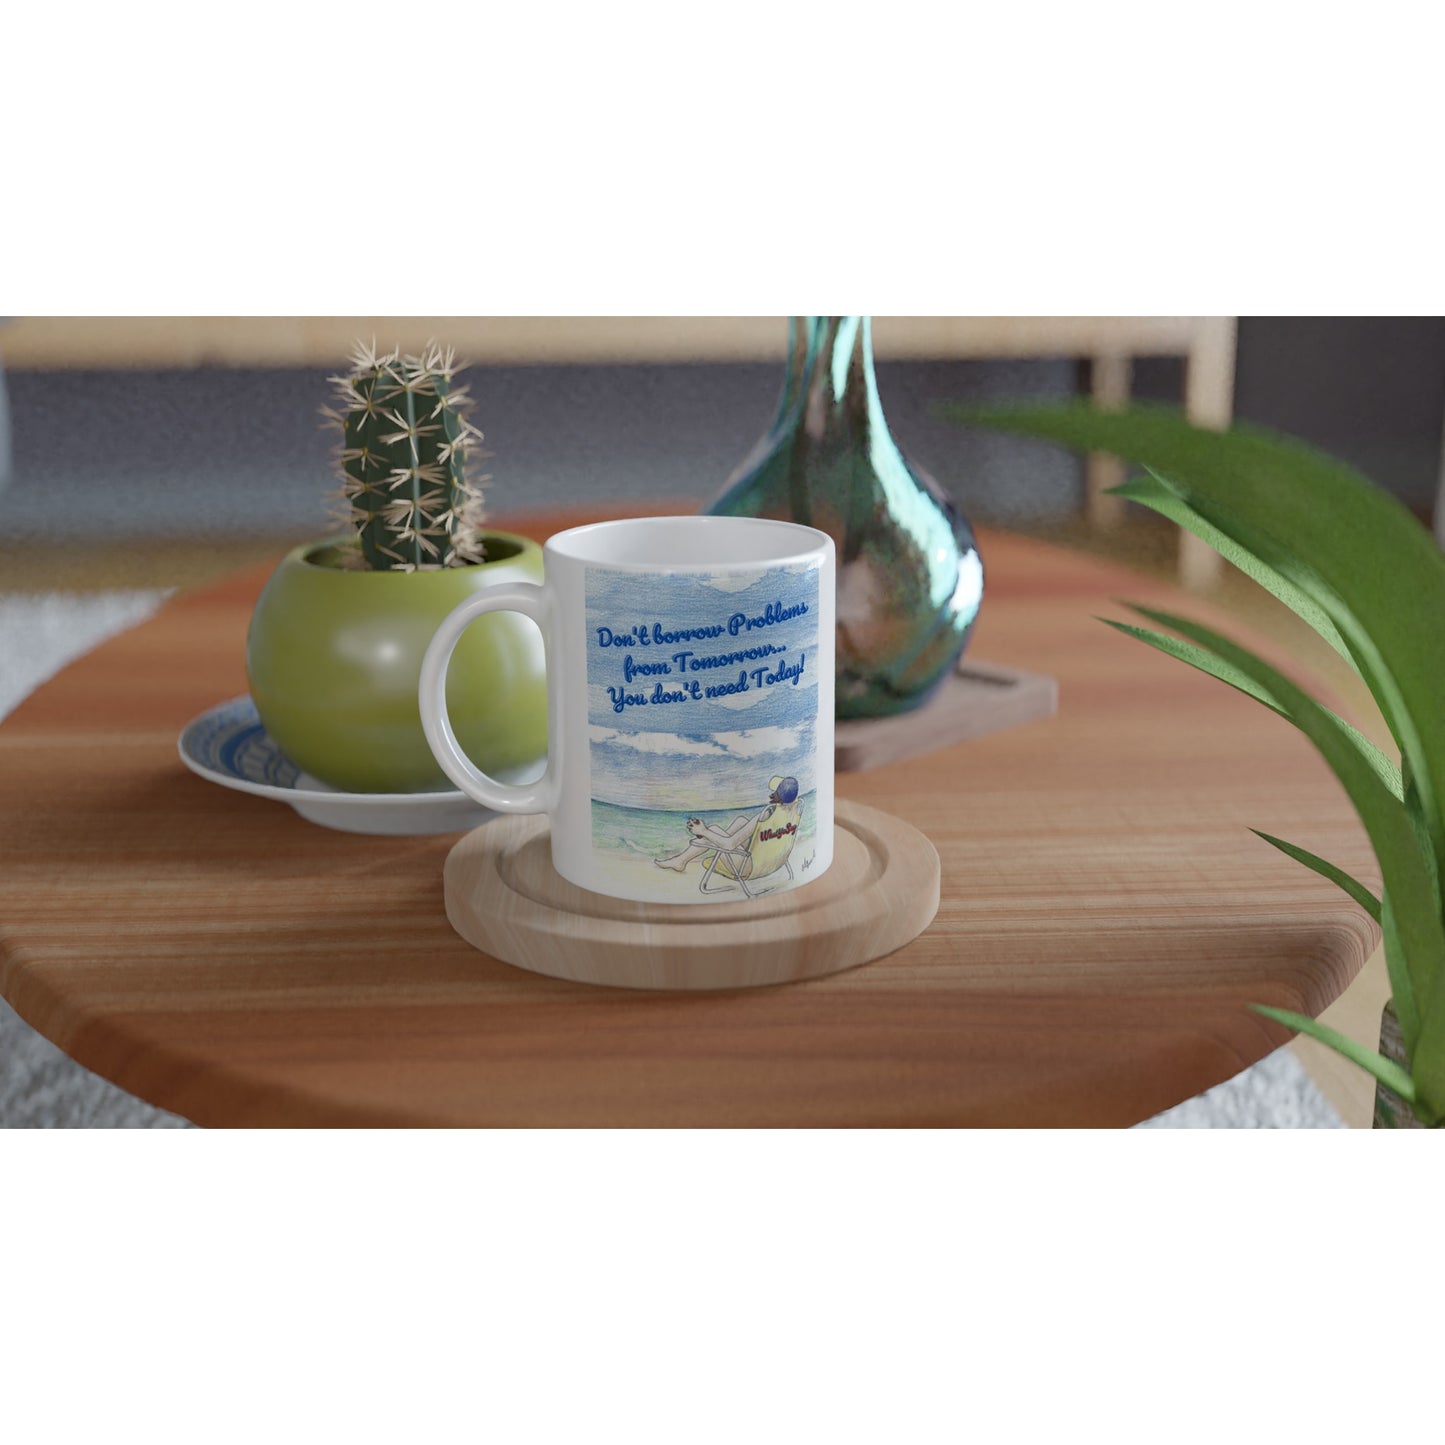 White ceramic 11oz mug with funny saying Don't borrow Problems from Tomorrow... You don't need Today! on front and WhatYa Say logo on back coffee mug dishwasher and microwave safe from WhatYa Say Apparel sitting on coaster on coffee table with green potted cactus and silver vase.